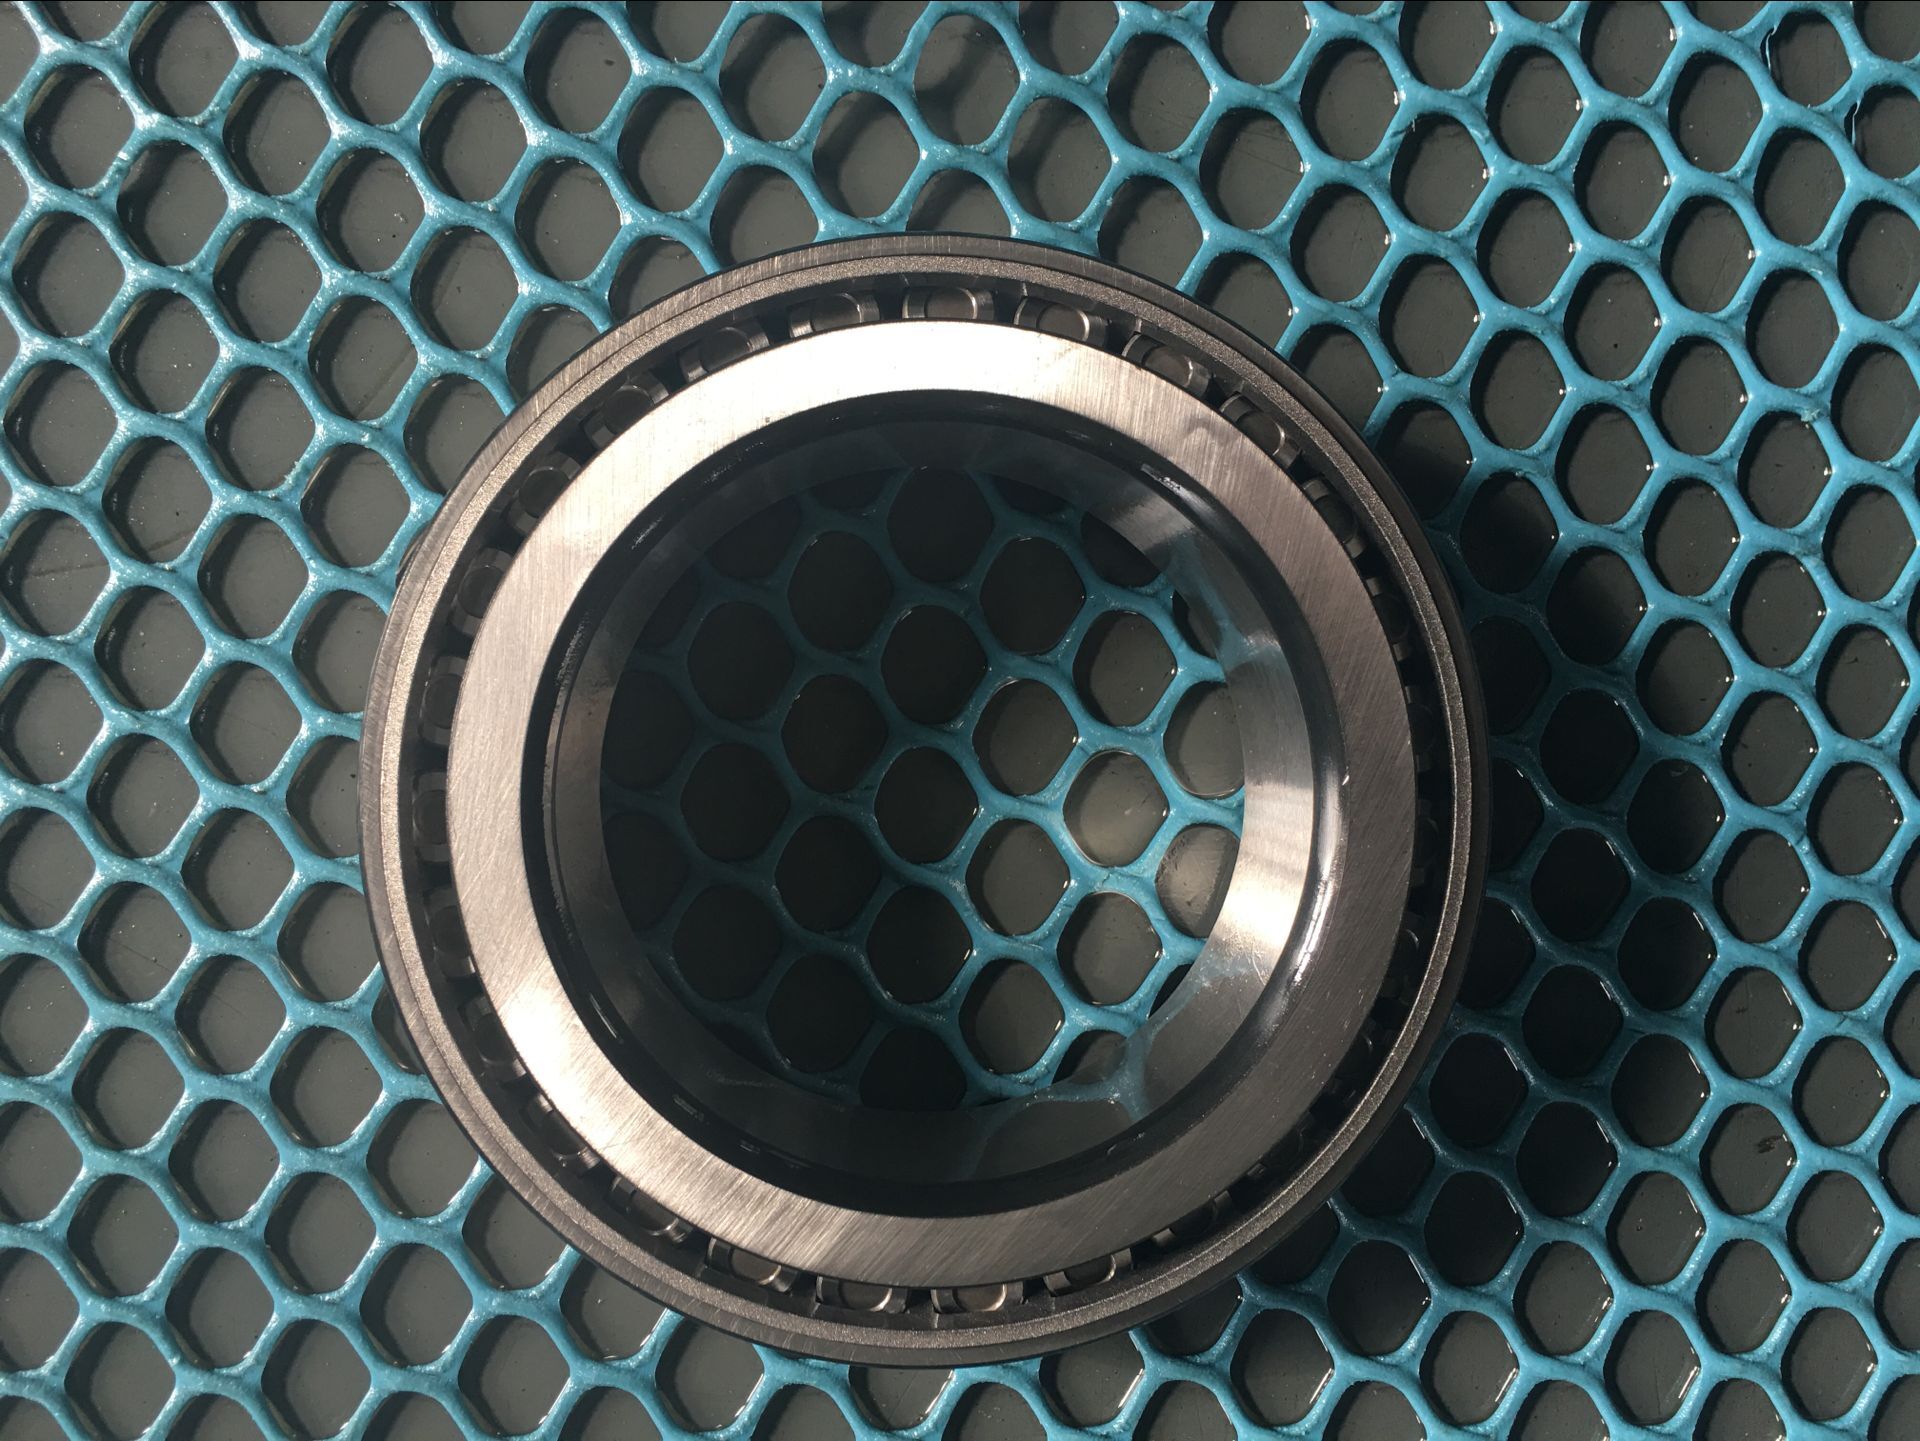 Russia GOST 520-2011 Taper Roller Bearing 2007116 2007117 2007118 2007119 2007120 2007121 2007122 2007124 2007126 2007128 2007130 